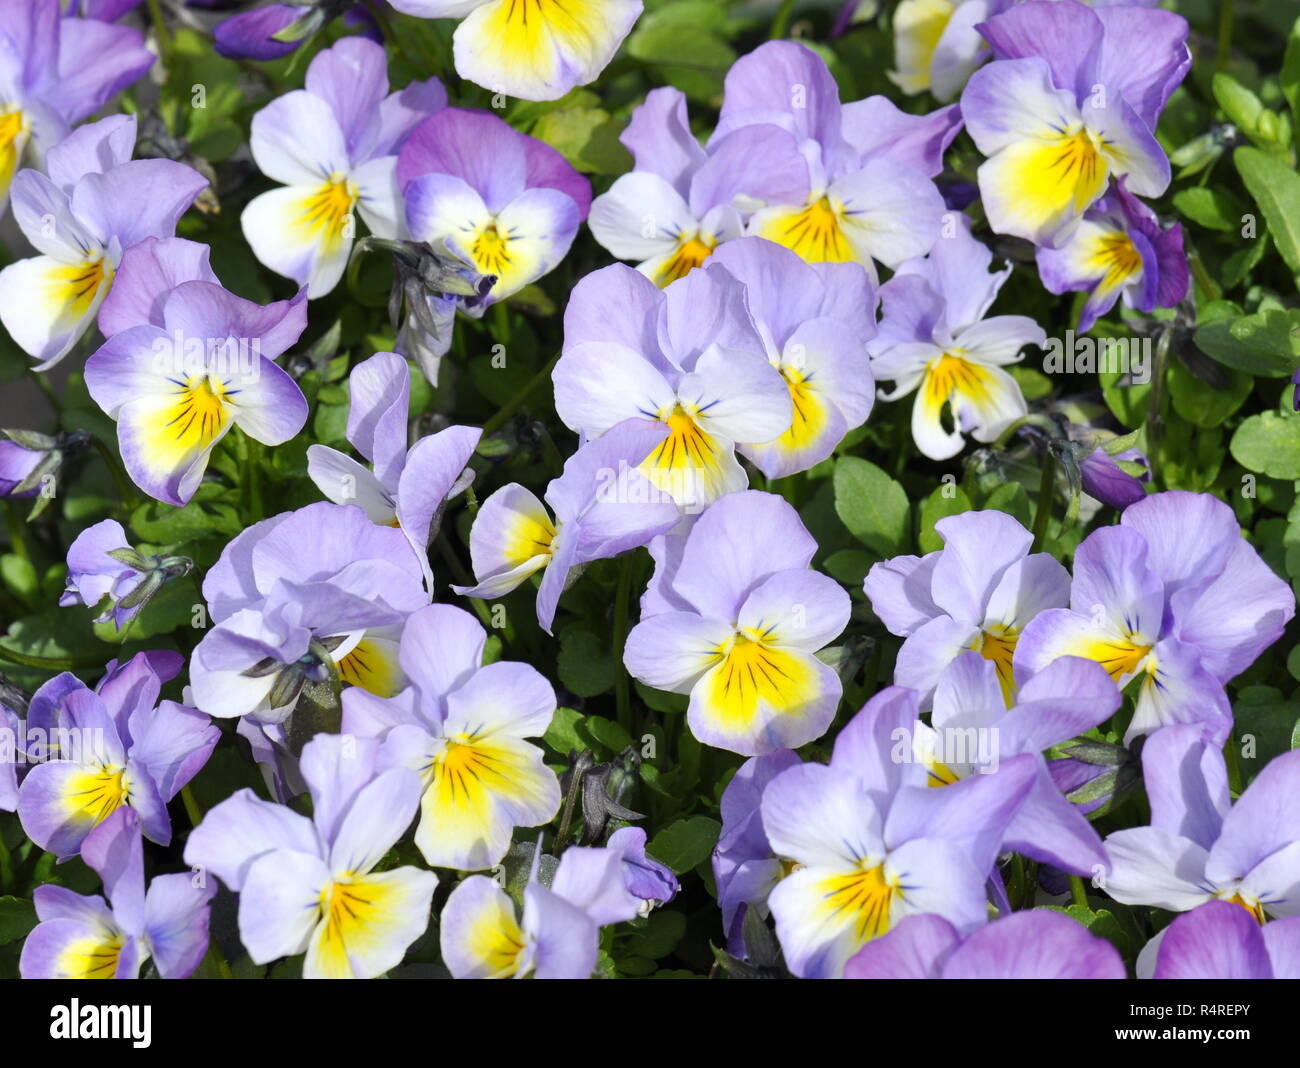 Flowering blue and white pansies Viola tricolor Stock Photo